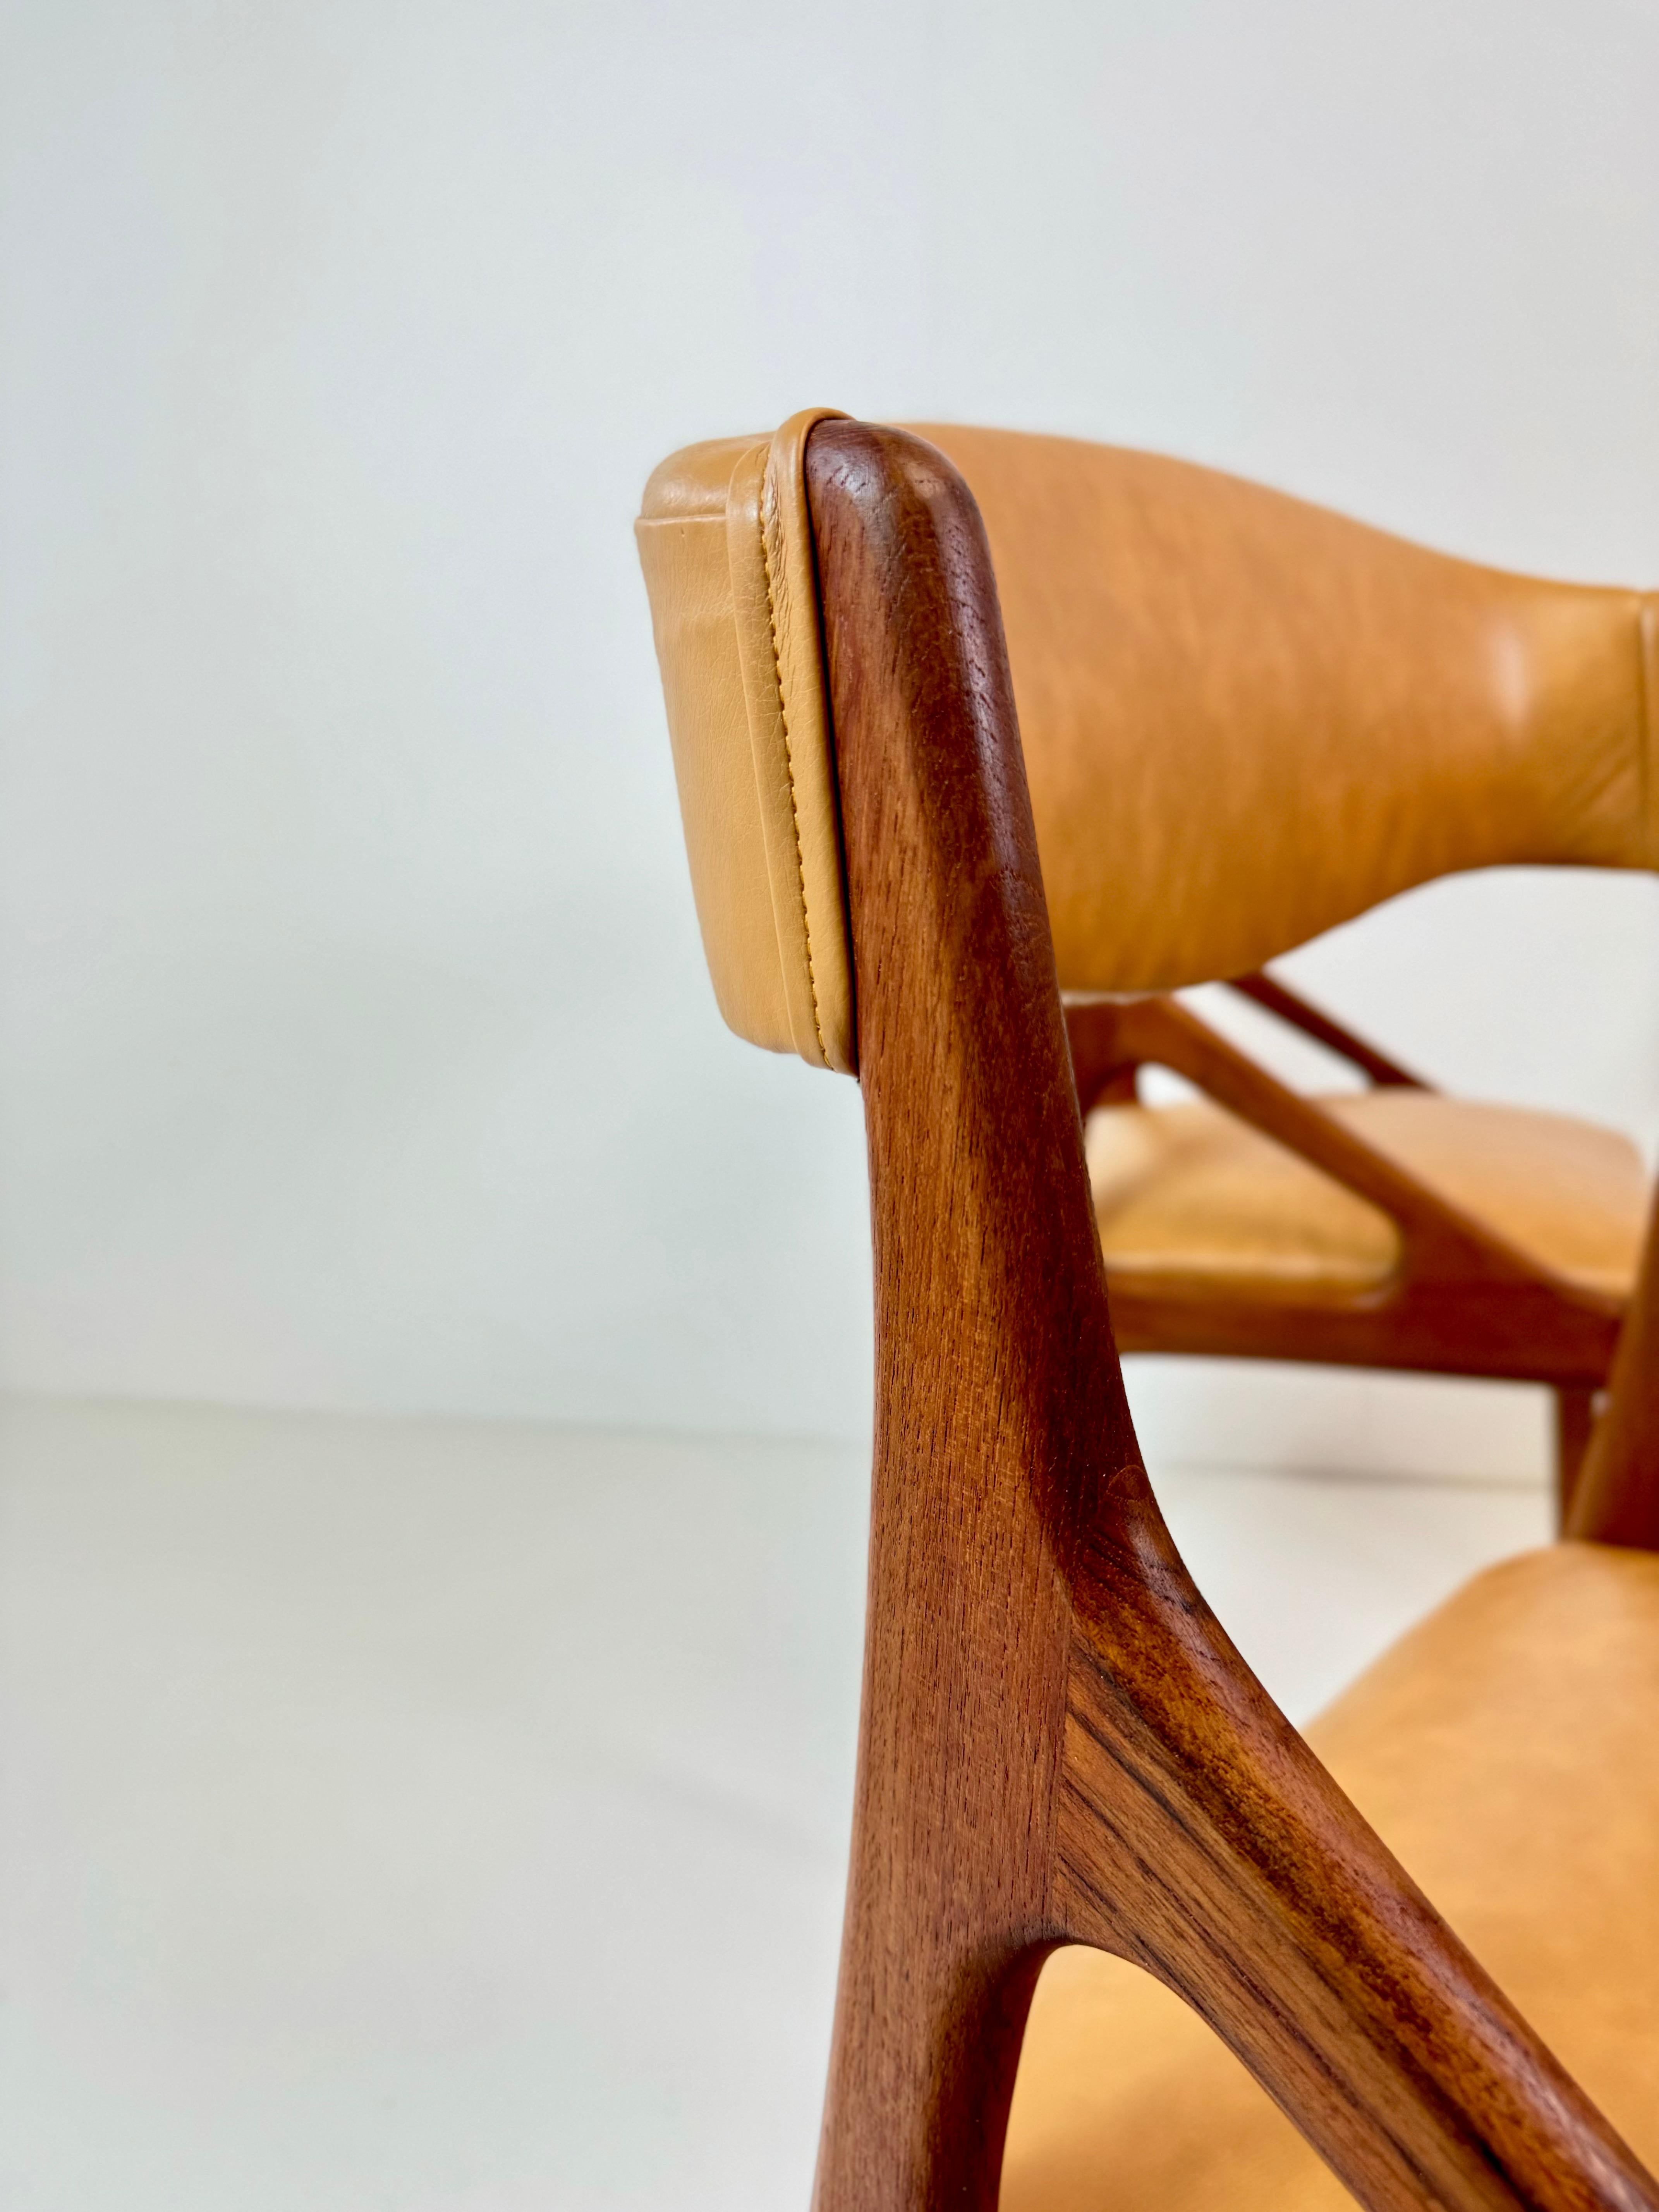 Mid-20th Century Set of Four Midcentury Modern Teak and Leatherette Dining Chairs c.1960's For Sale